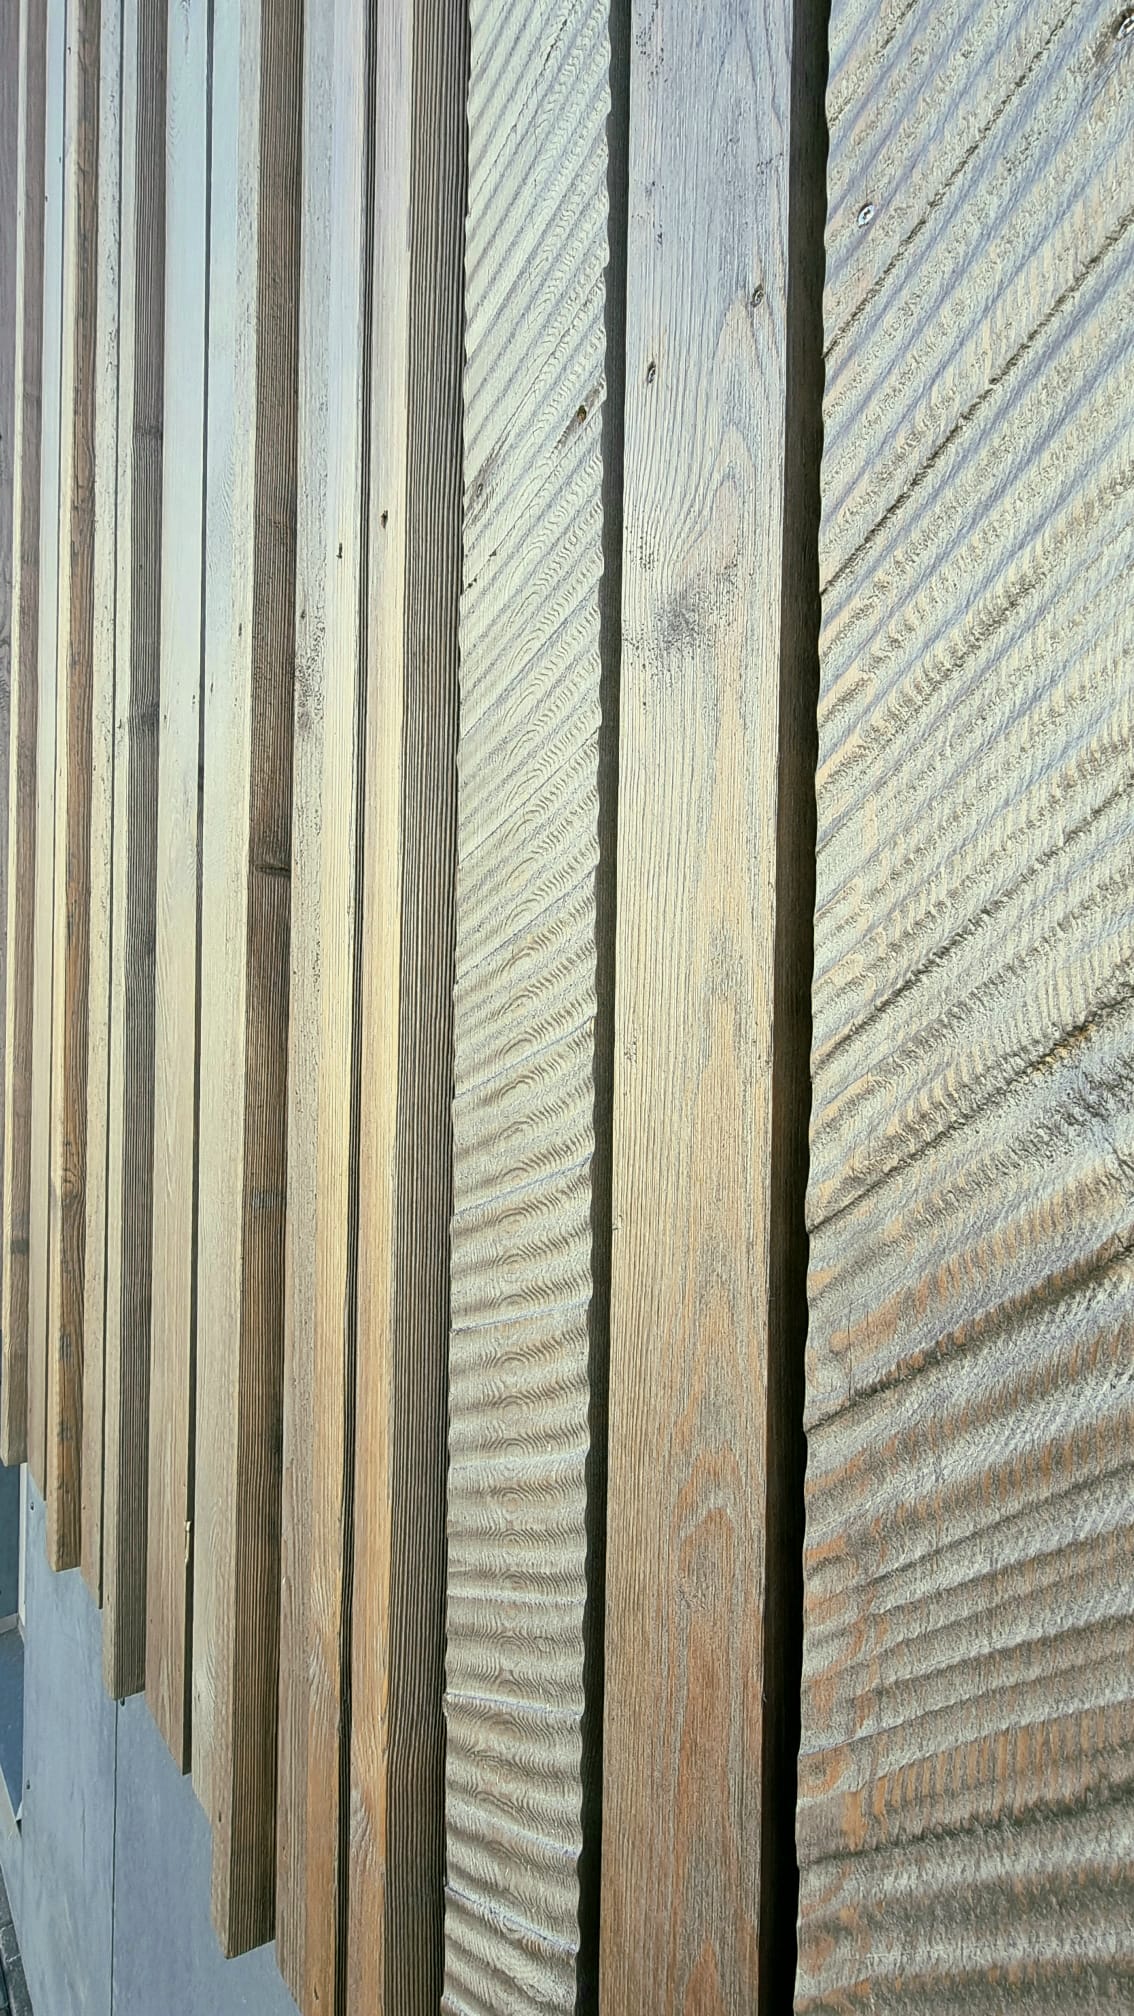 WoodB&C. Structured wood exterior facade